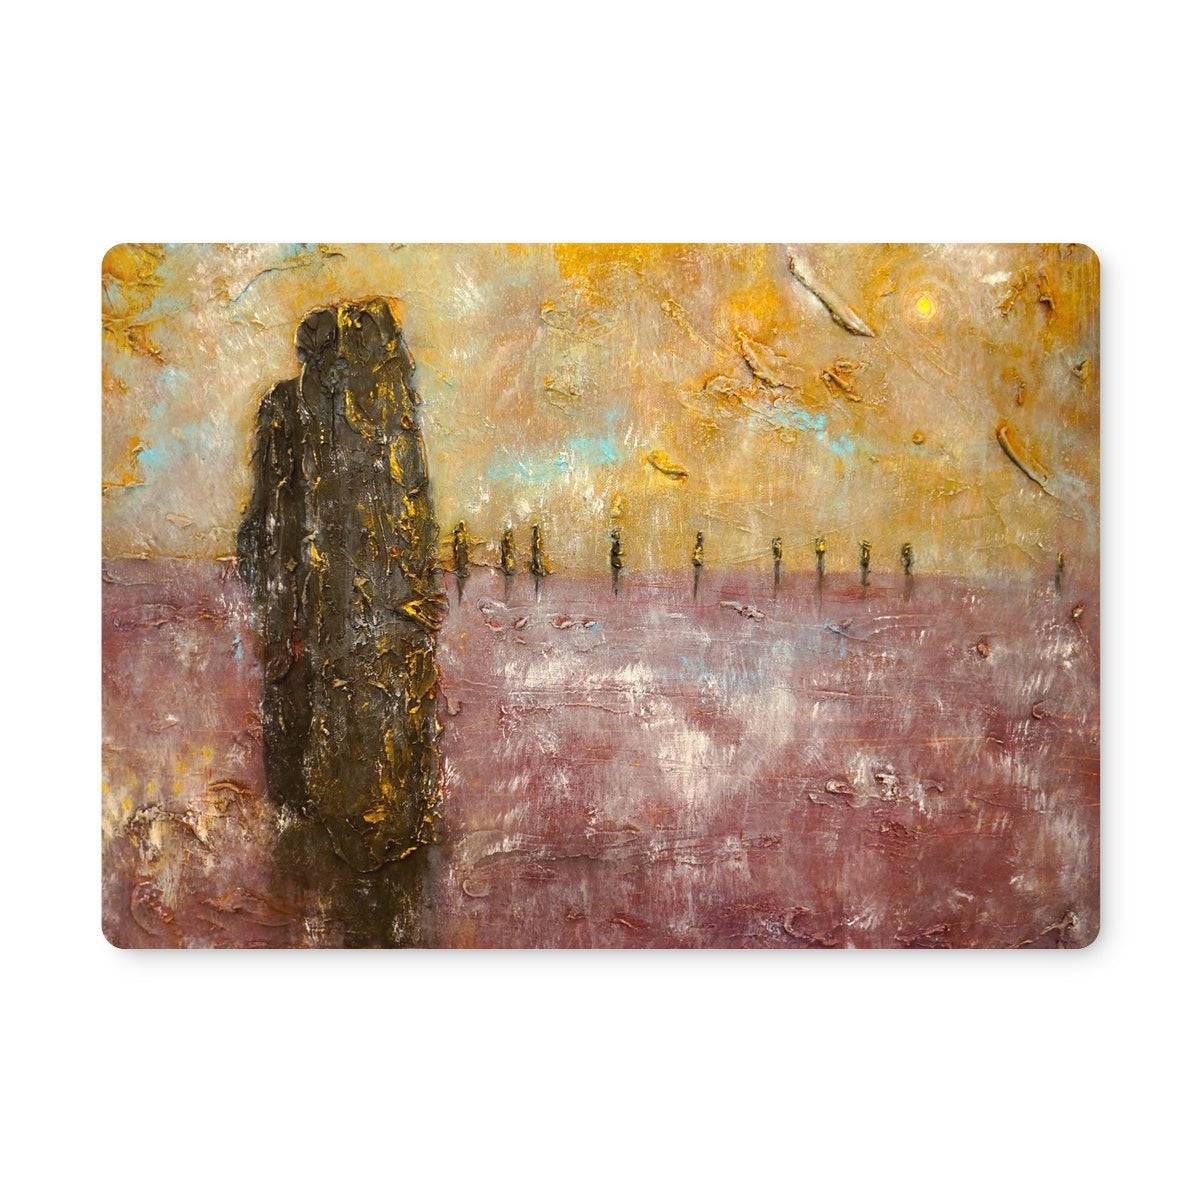 Bordgar Mist Orkney Art Gifts Placemat-Placemats-Orkney Art Gallery-4 Placemats-Paintings, Prints, Homeware, Art Gifts From Scotland By Scottish Artist Kevin Hunter